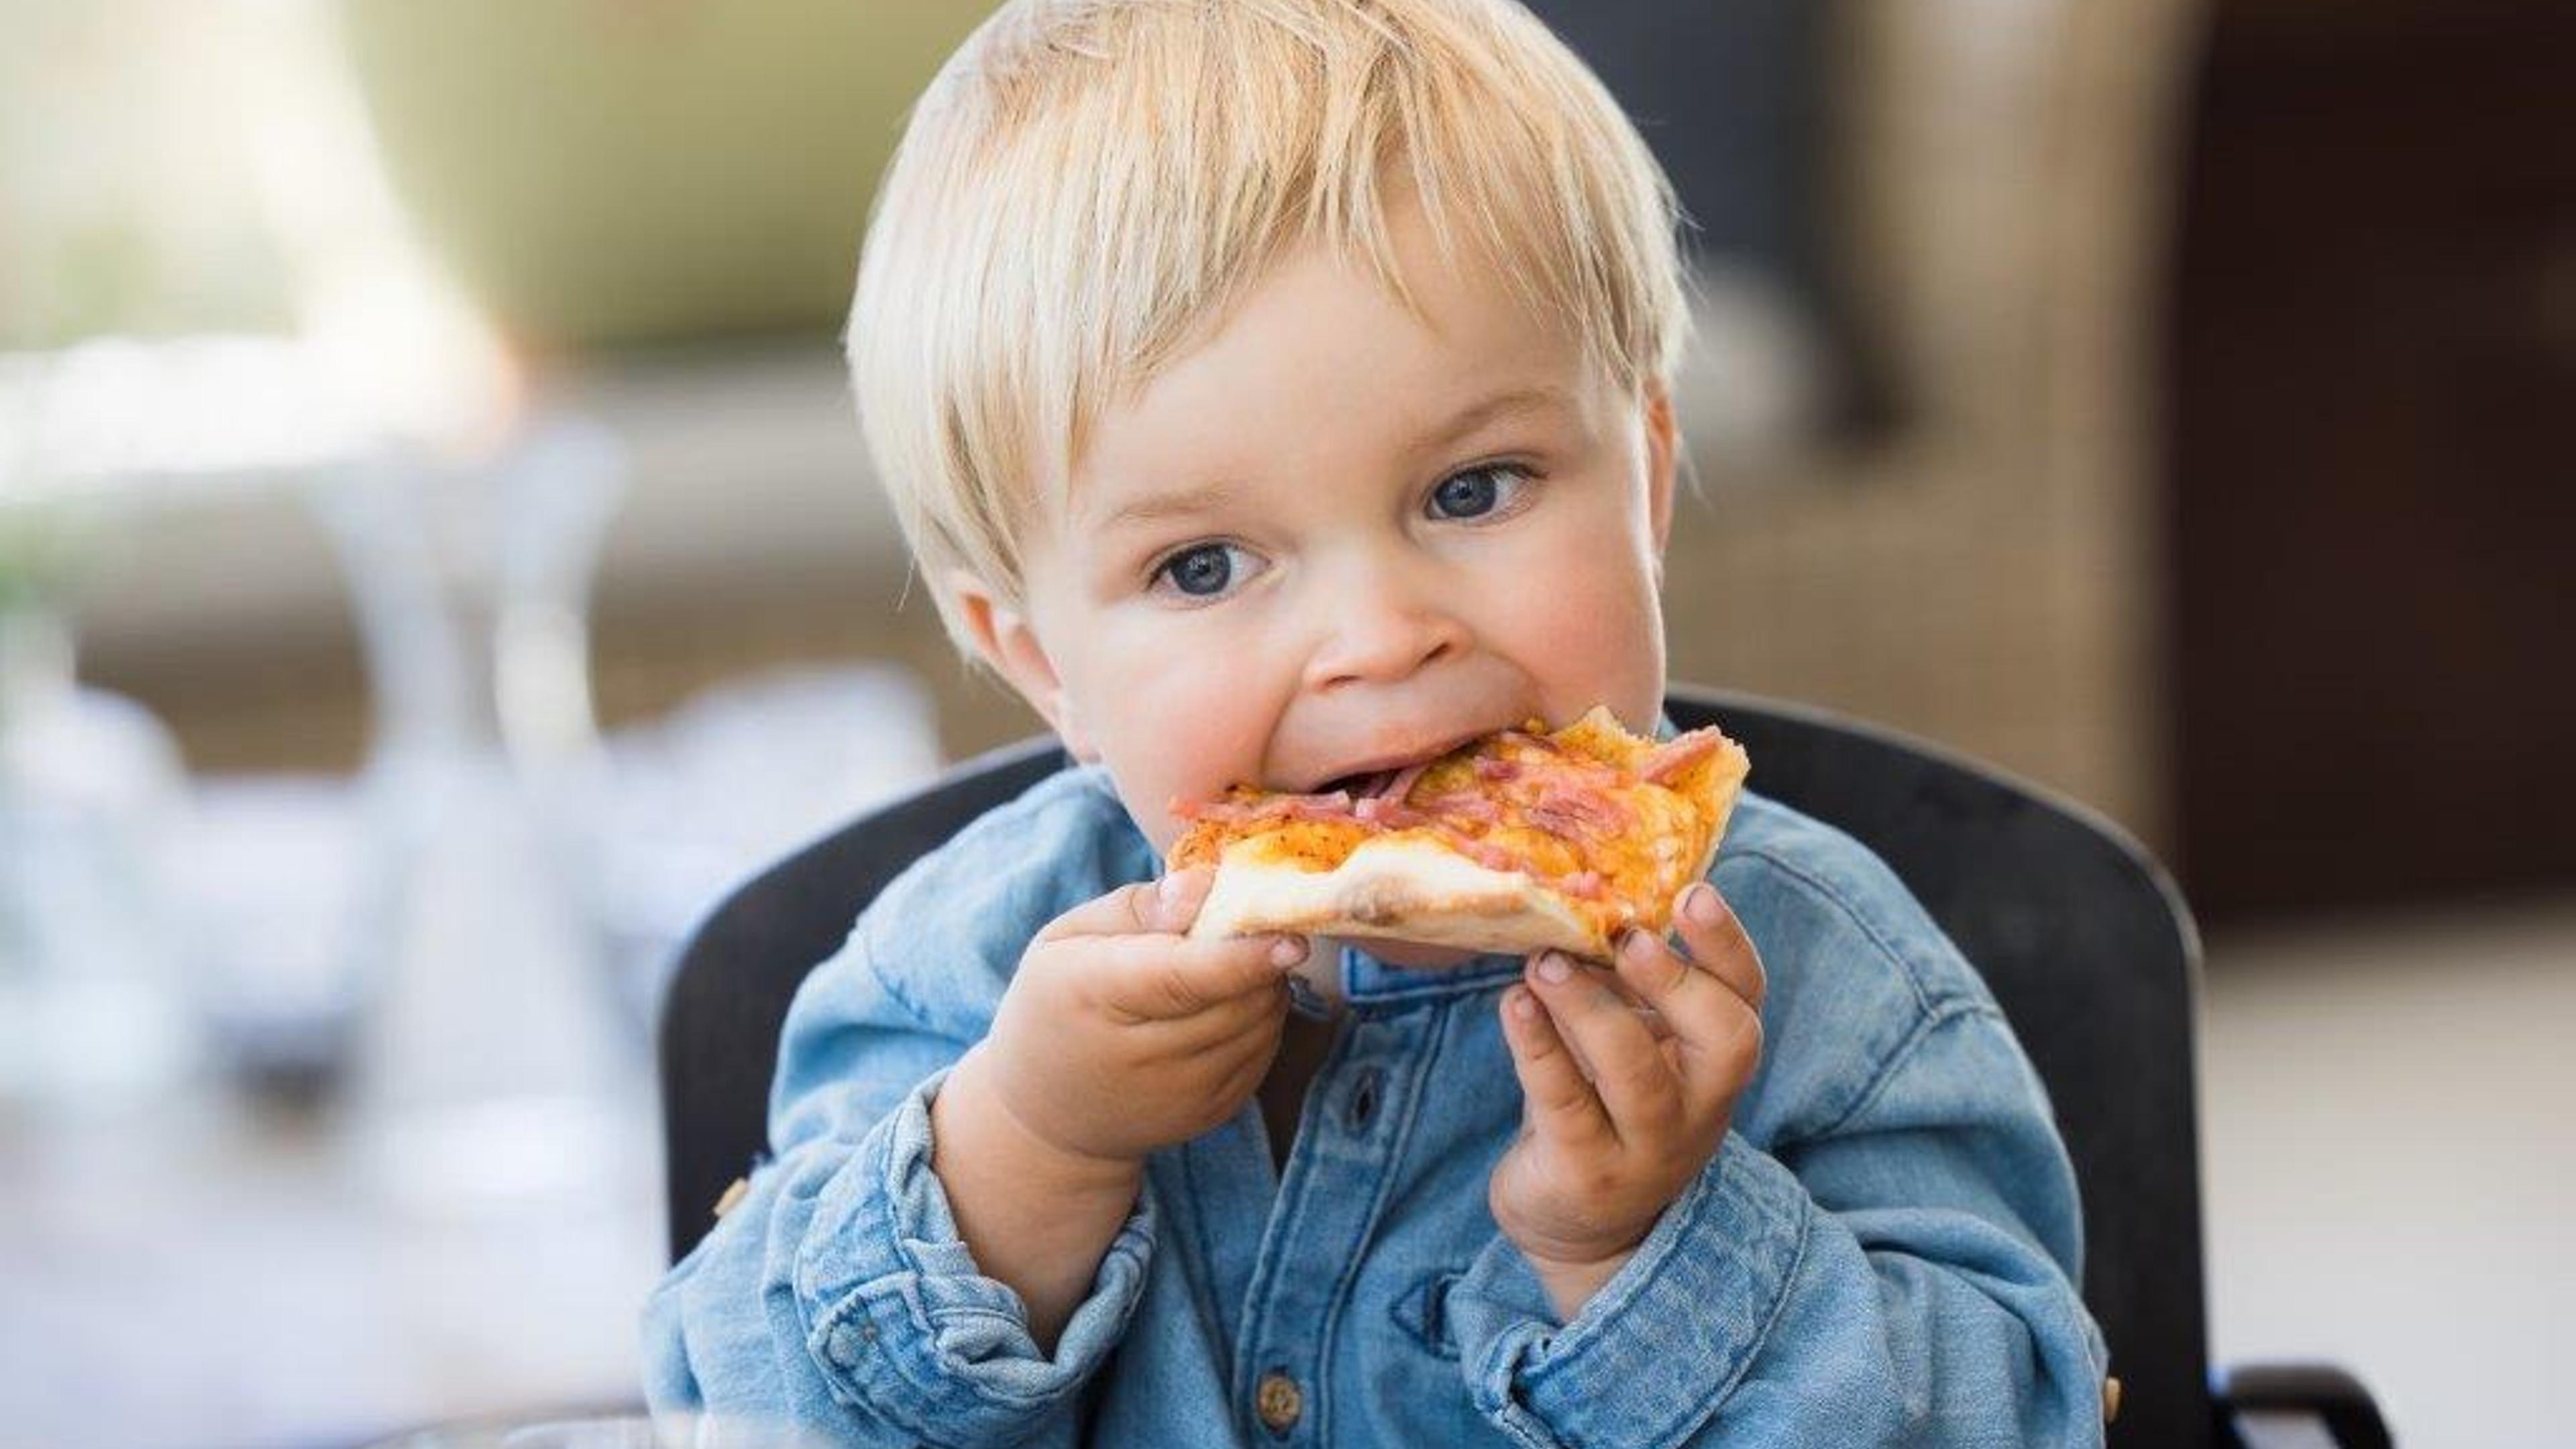 A child eats pizza in the restaurant